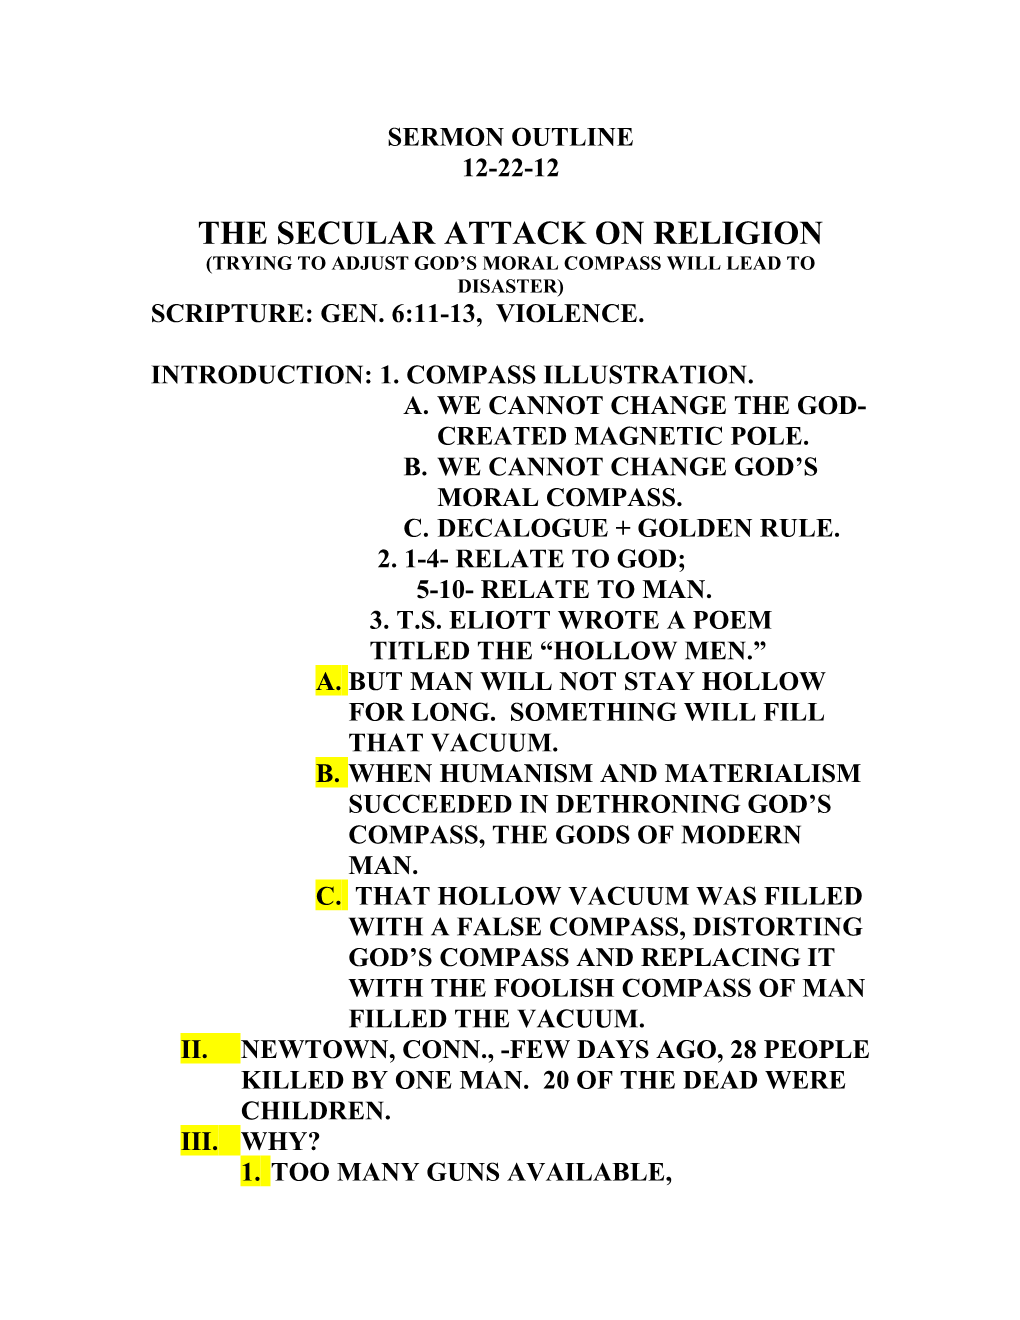 The Secular Attack on Religion